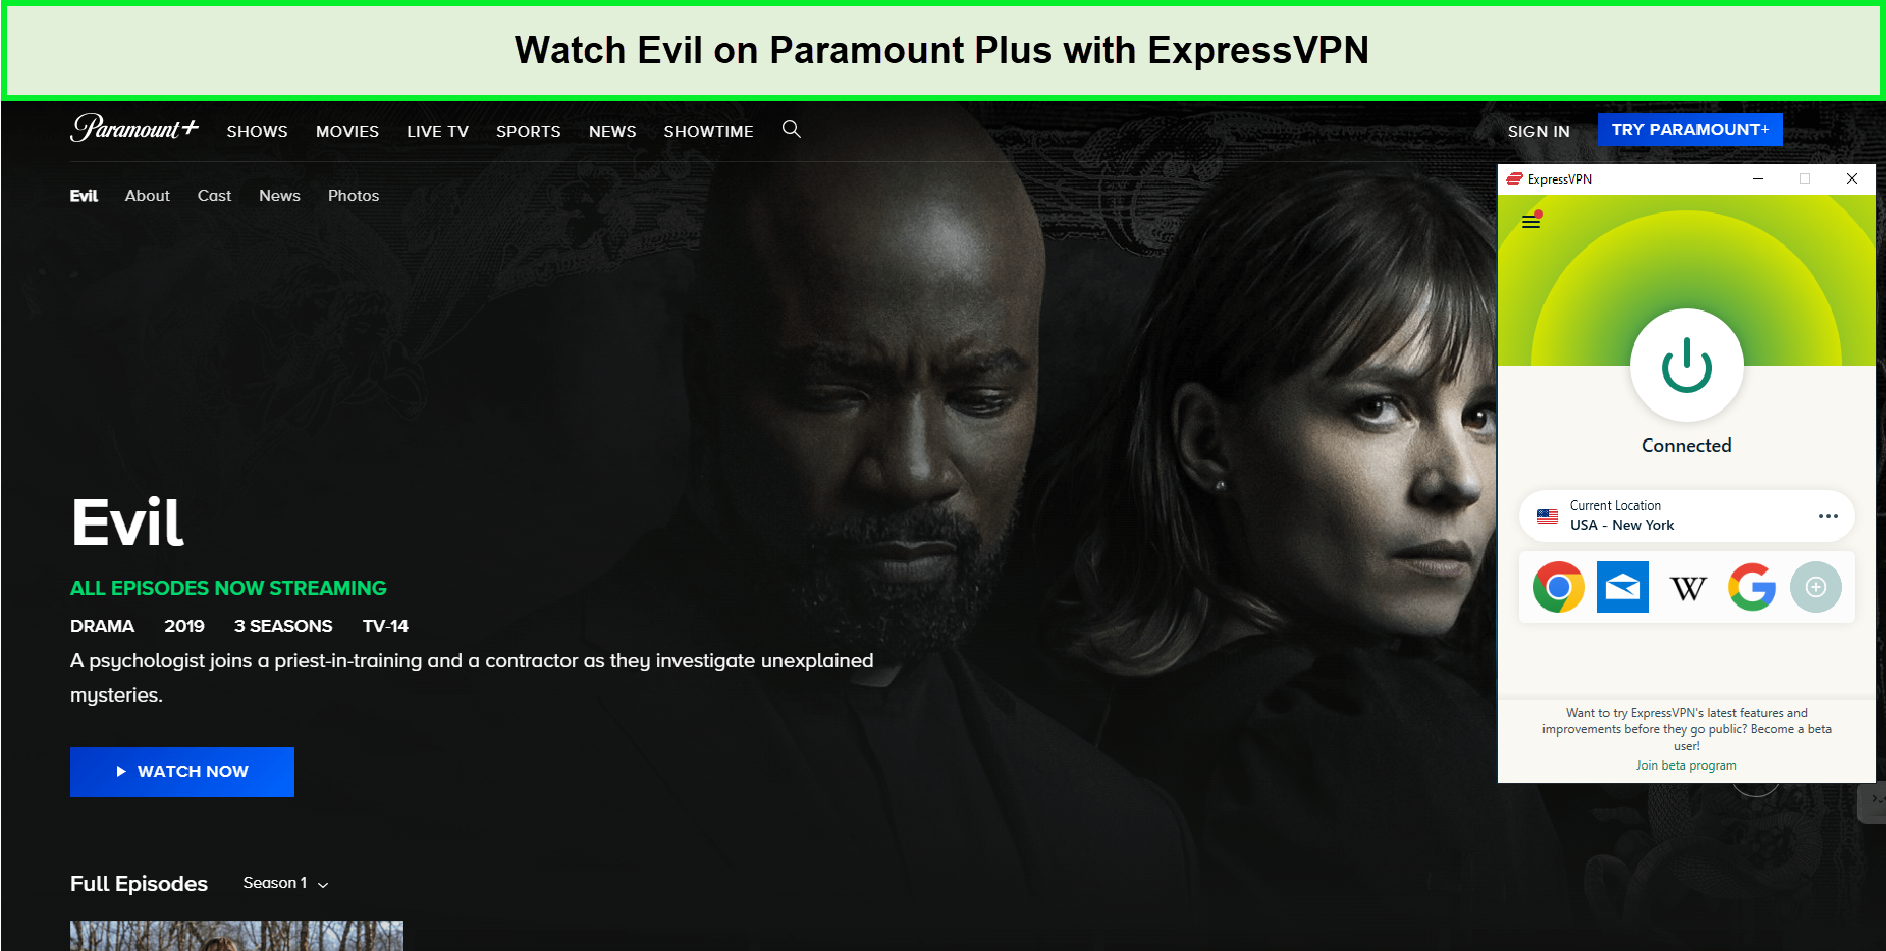 Watch-Evil-All-Seasons-in-Netherlands-on-Paramount-Plus-with-ExpressVPN